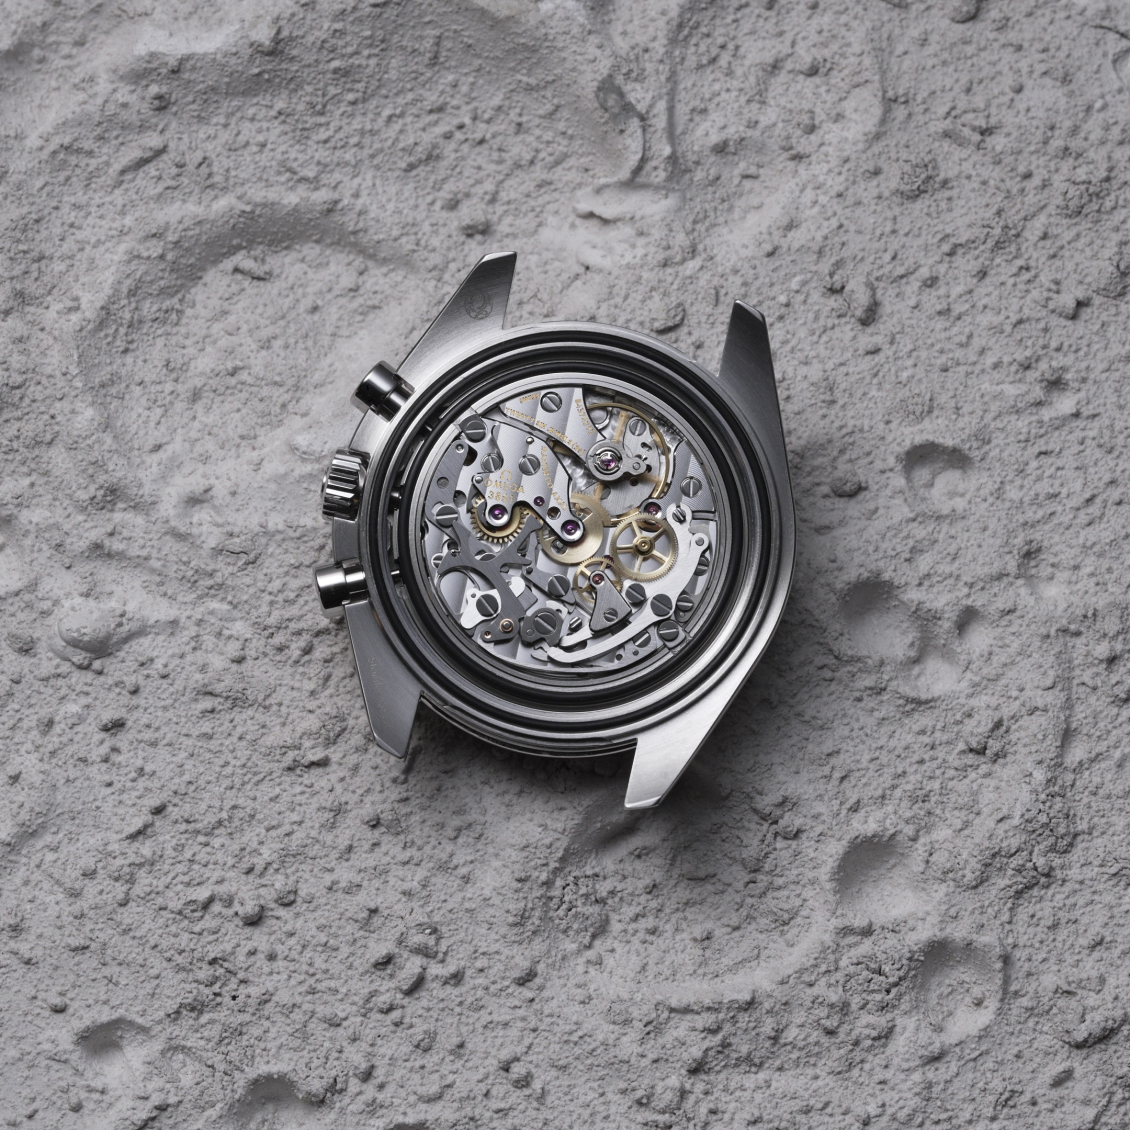 From Moonlight to Daylight: Omega’s Speedmaster Moonwatch Shines in White